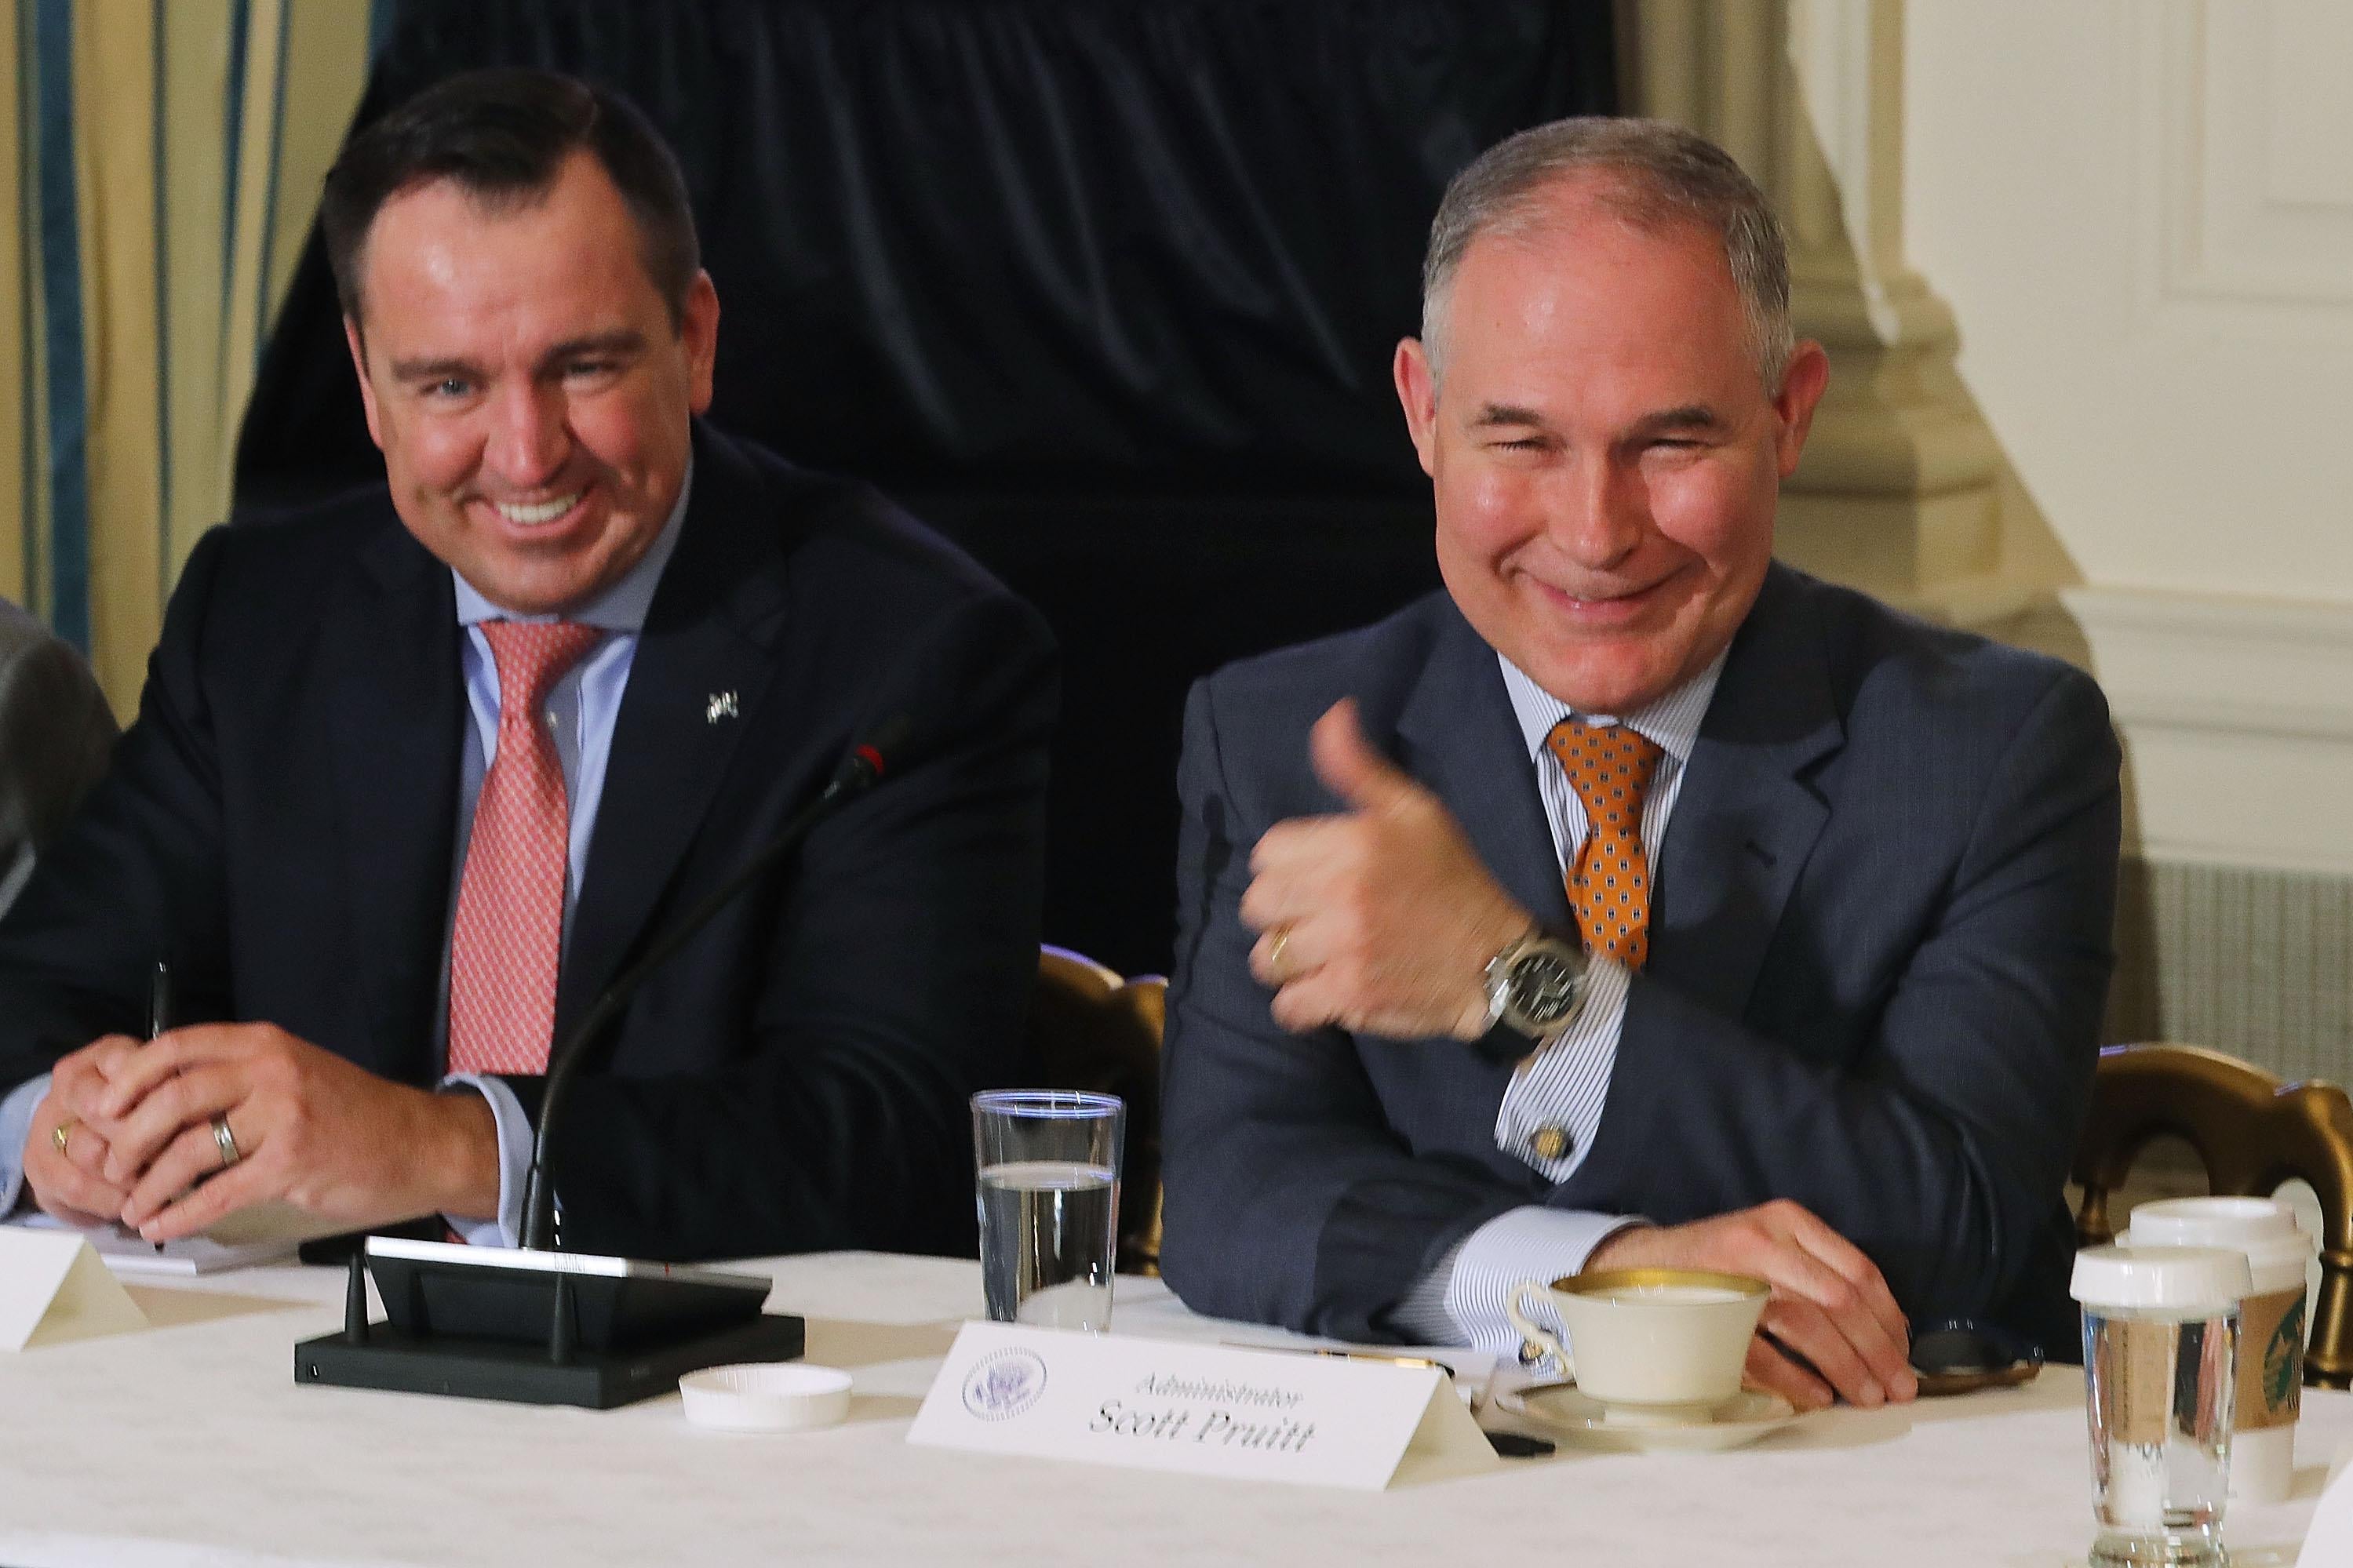 WASHINGTON, DC - FEBRUARY 12:  Environmental Protection Agency Administrator Scott Pruitt (R) gives a thumbs-up during a meeting with Utah Speaker of the House Greg Hughes and other state and local leaders where U.S. President Donald Trump unveiled his administration's long-awaited infrastructure plan in the State Dining Room at the White House February 12, 2018 in Washington, DC. The $1.5 trillion plan to repair and rebuild the nation's crumbling highways, bridges, railroads, airports, seaports and water systems is funded with $200 million in federal money with the remaining 80 percent coming from state and local governments.  (Photo by Chip Somodevilla/Getty Images)